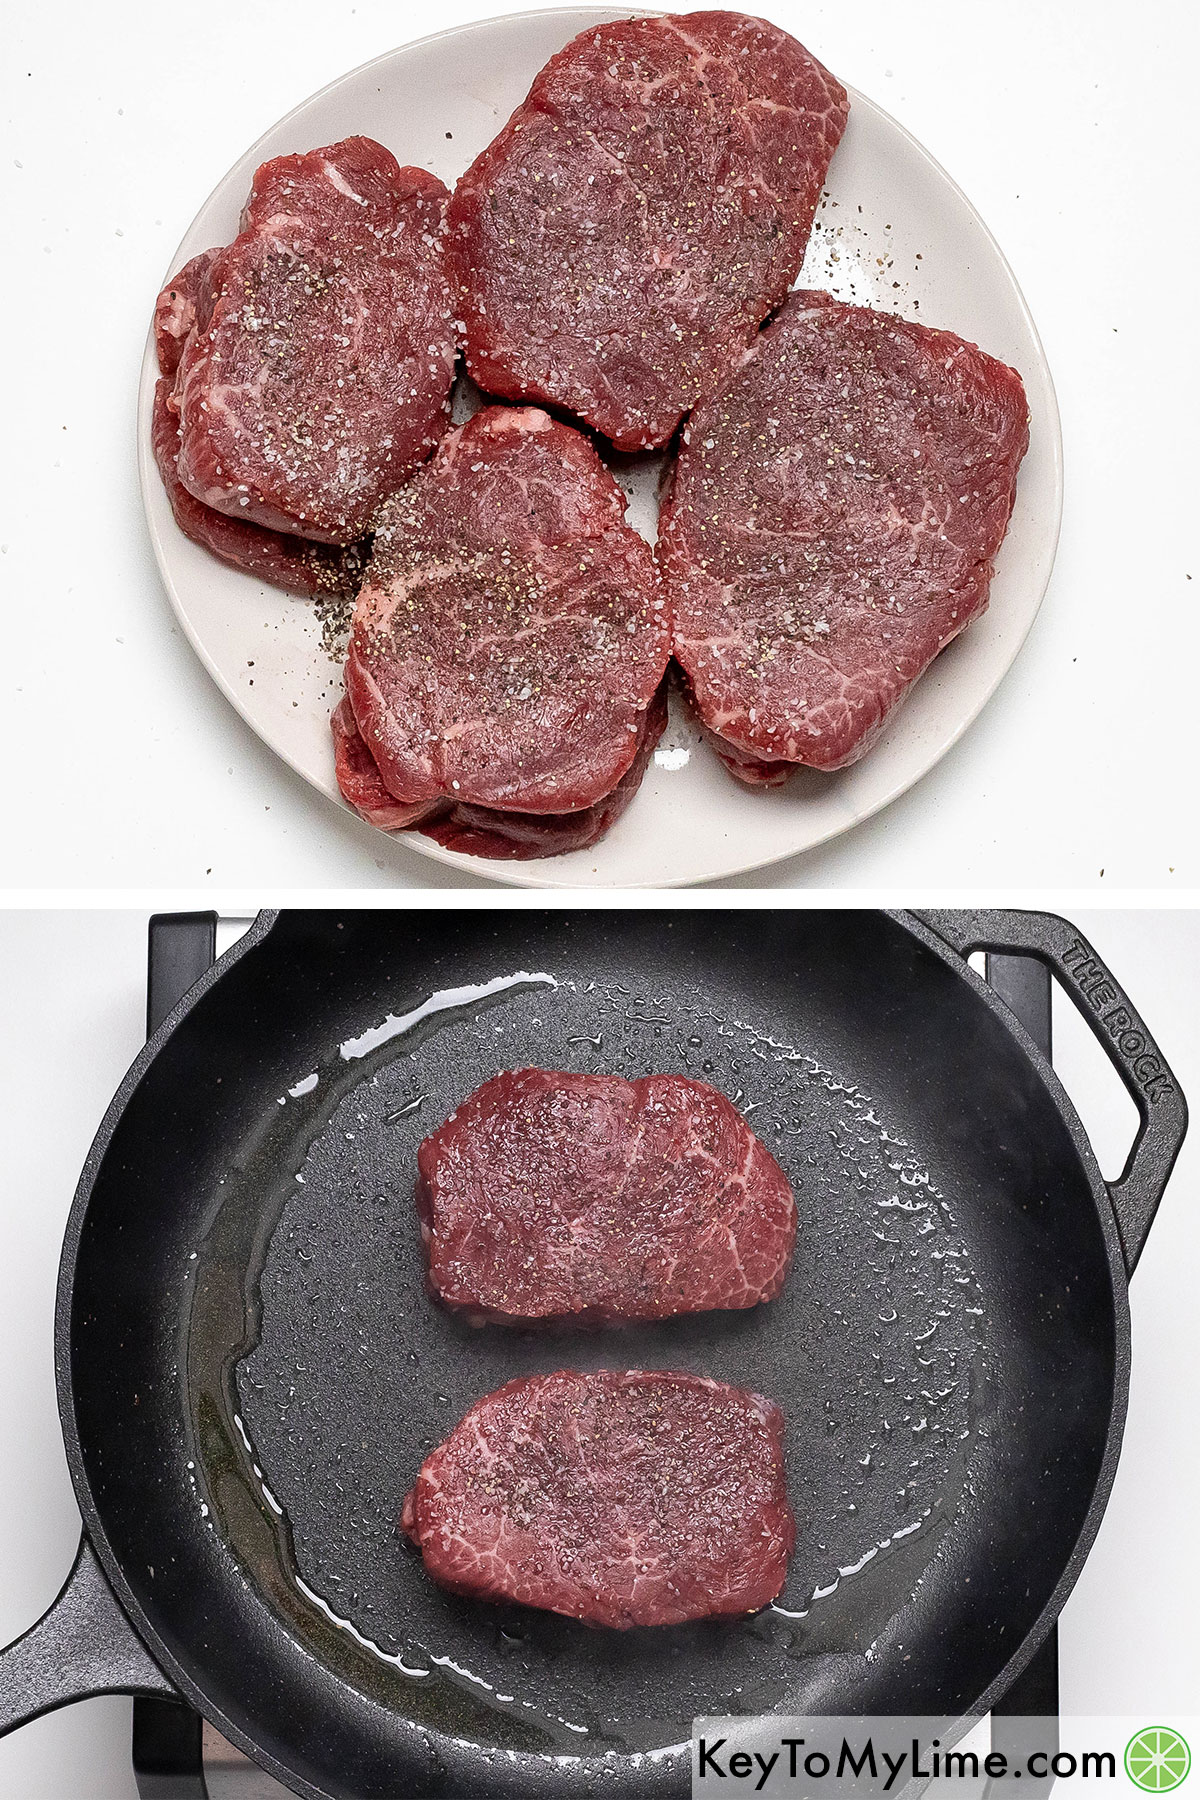 Seasoning the steak with salt and pepper on both sides, and then adding them to a hot skillet with olive oil.